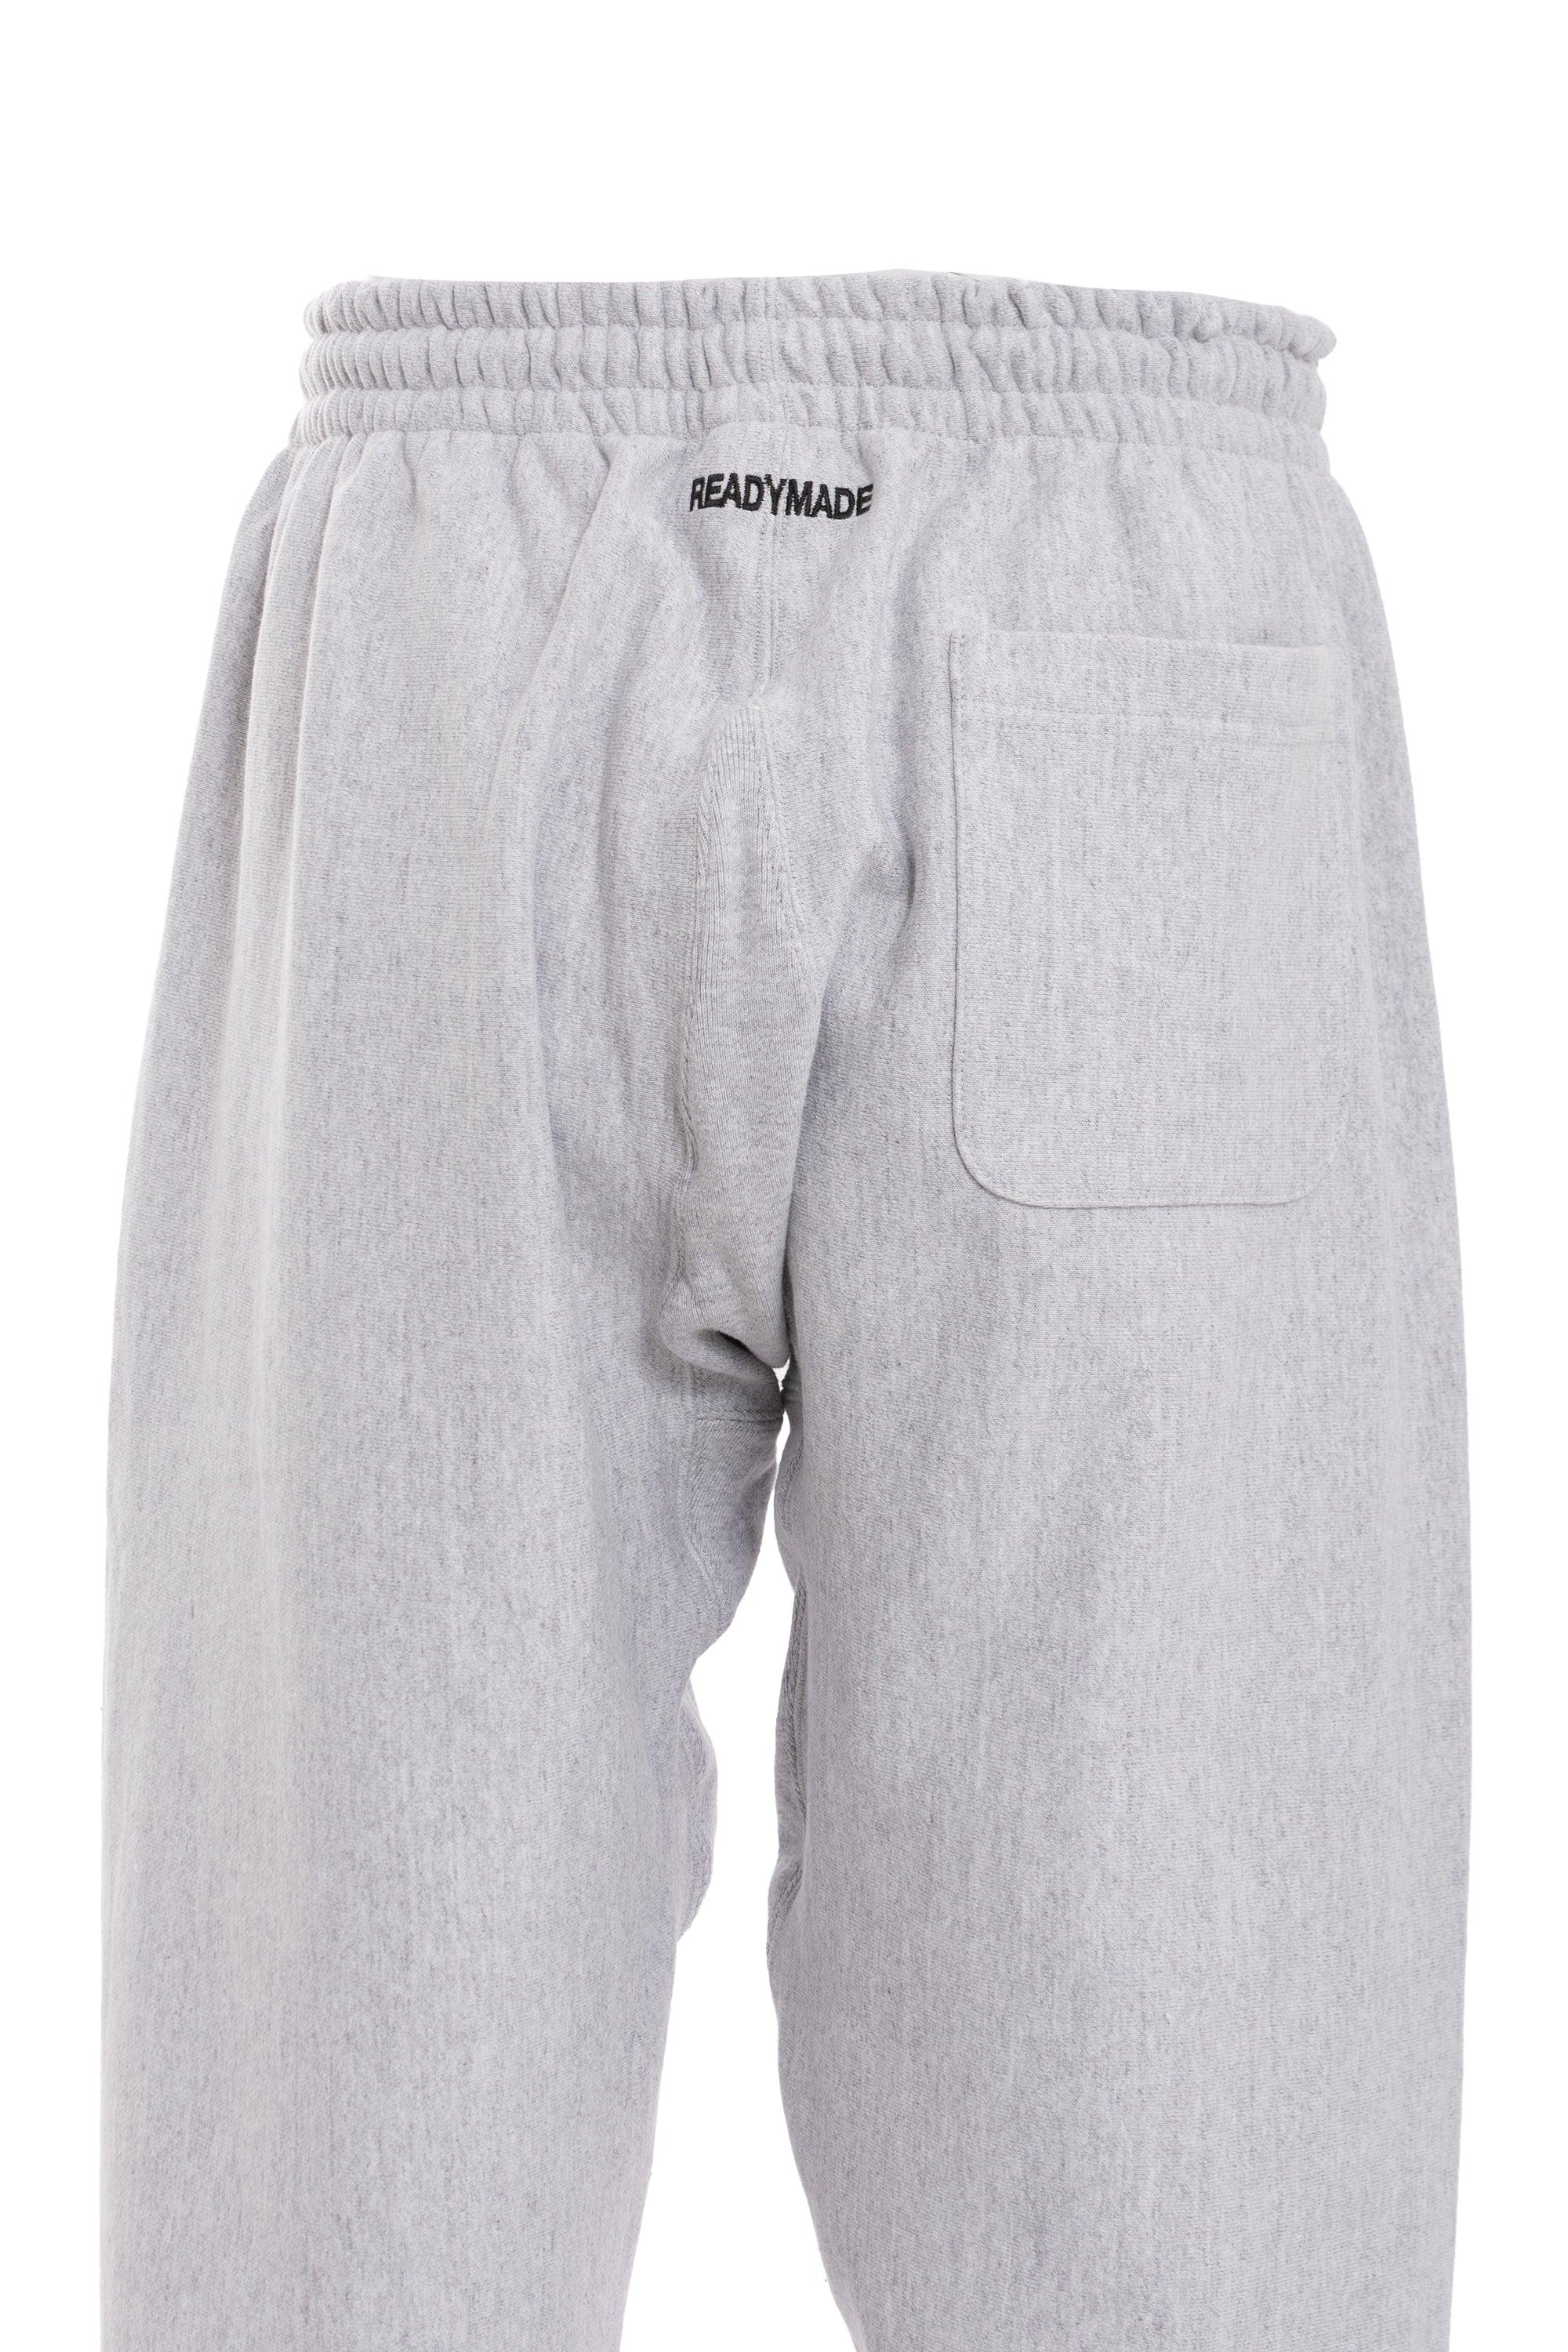 READYMADE Sweat Pants in Gray for Men   Lyst